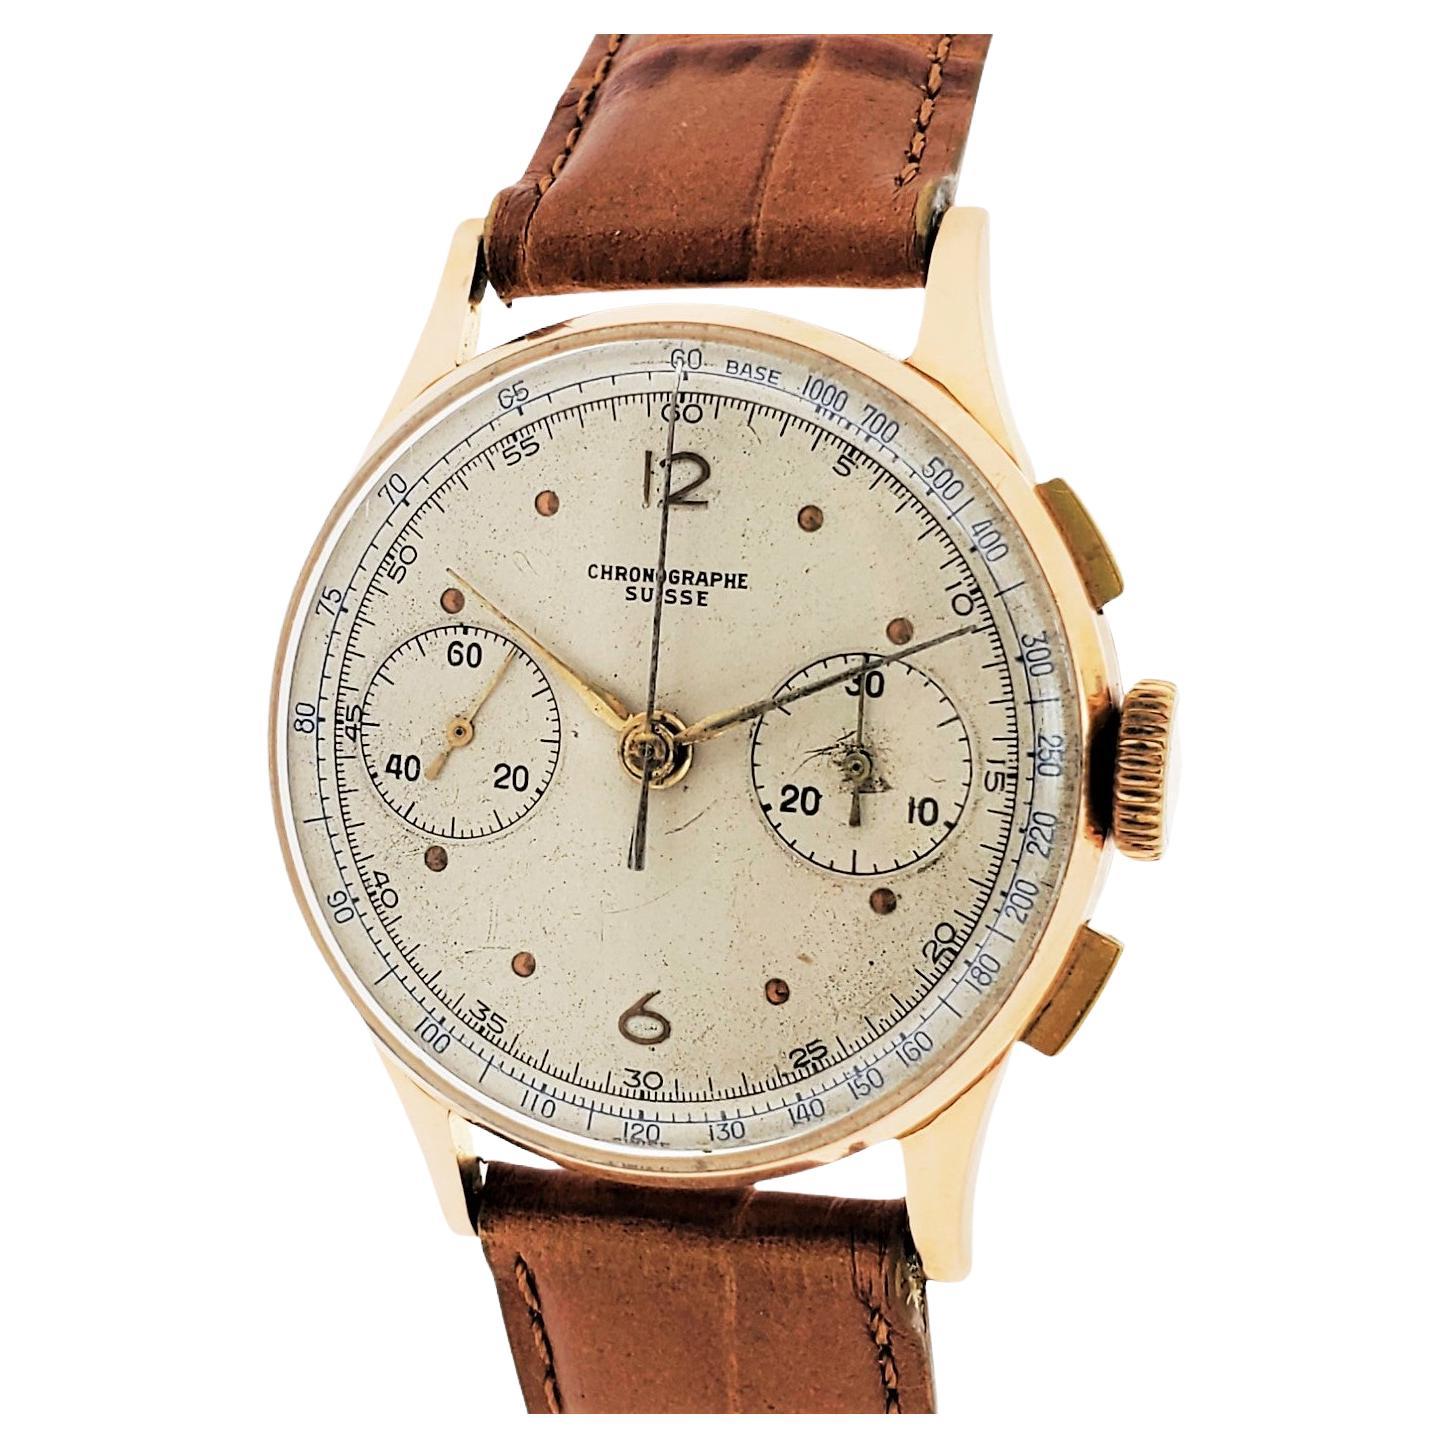 Chronographe Swisse Vintage Chronograph, Made in 18k Rose Gold, circa 1950s For Sale